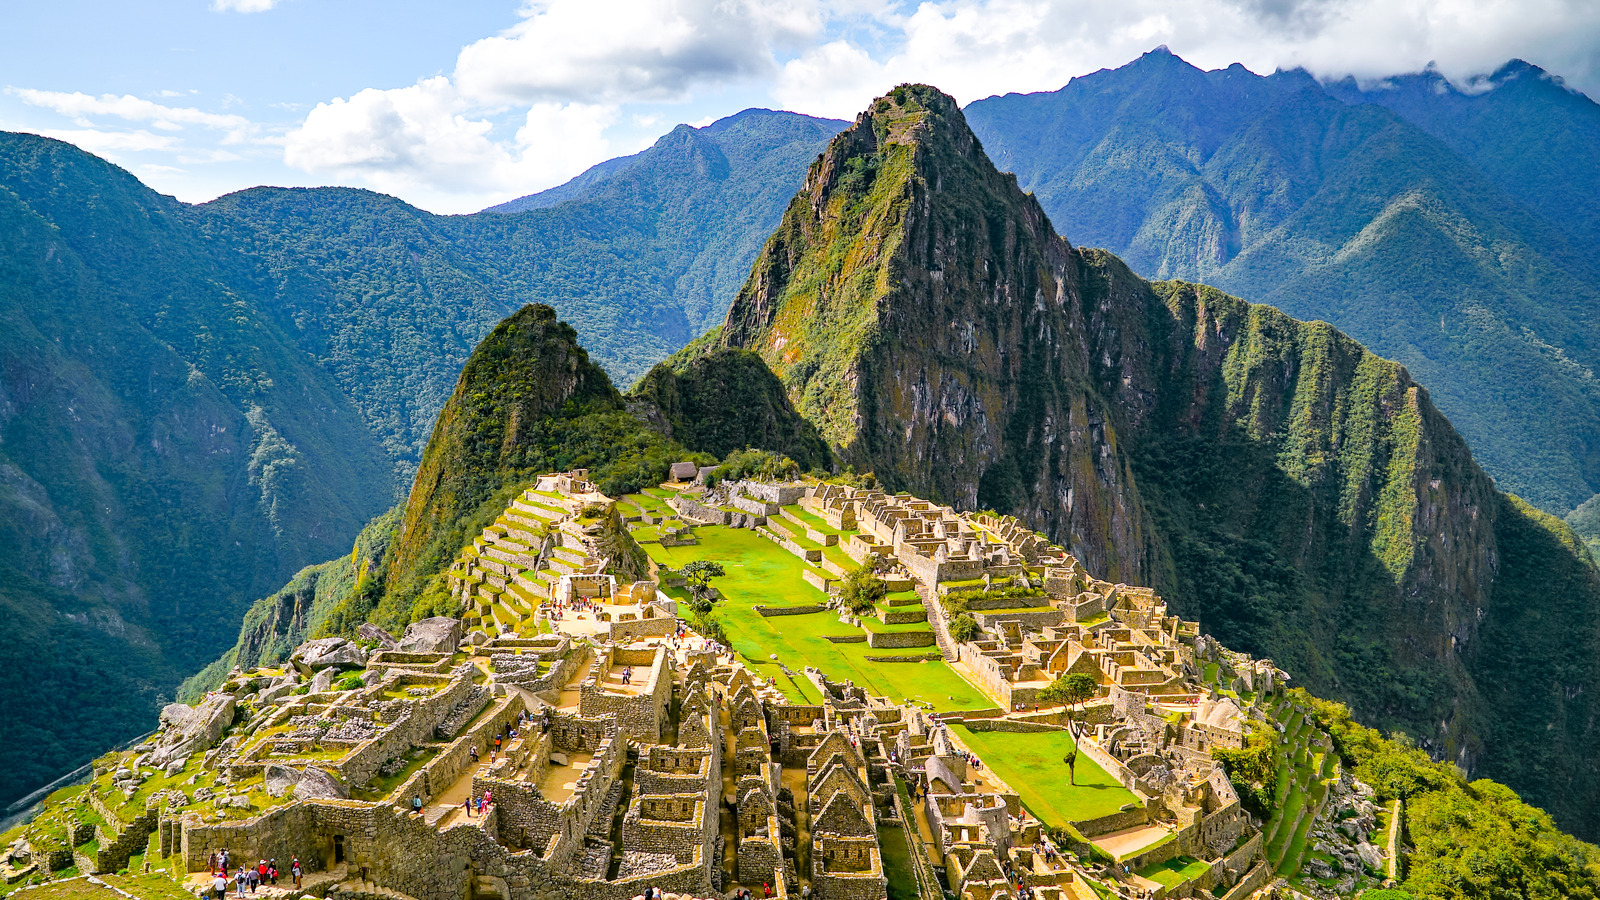 Have We Been Calling Machu Picchu By The Wrong Name This Whole Time?